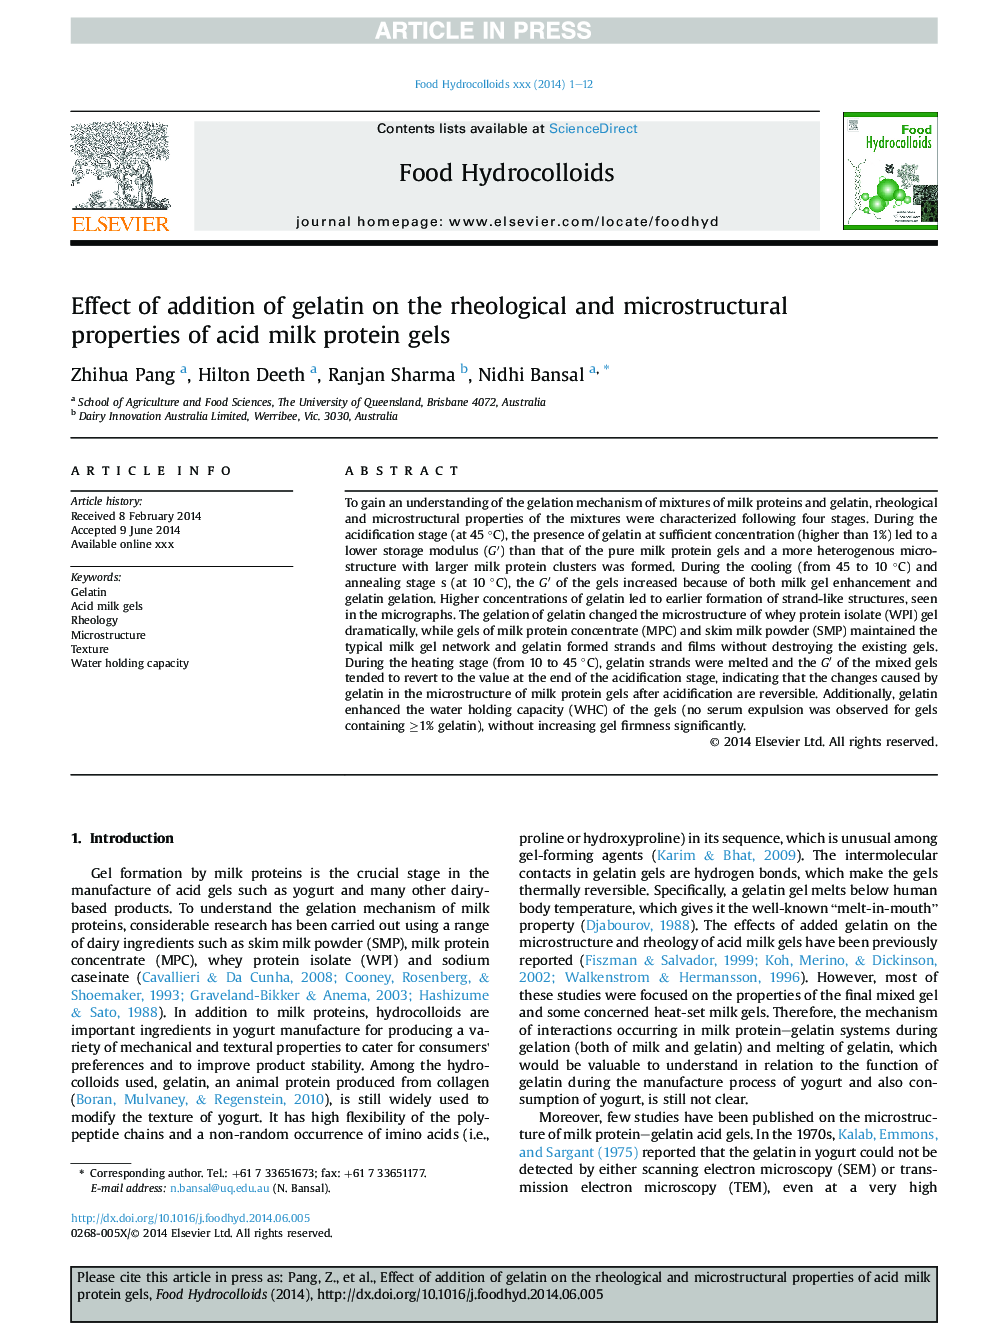 Effect of addition of gelatin on the rheological and microstructural properties of acid milk protein gels